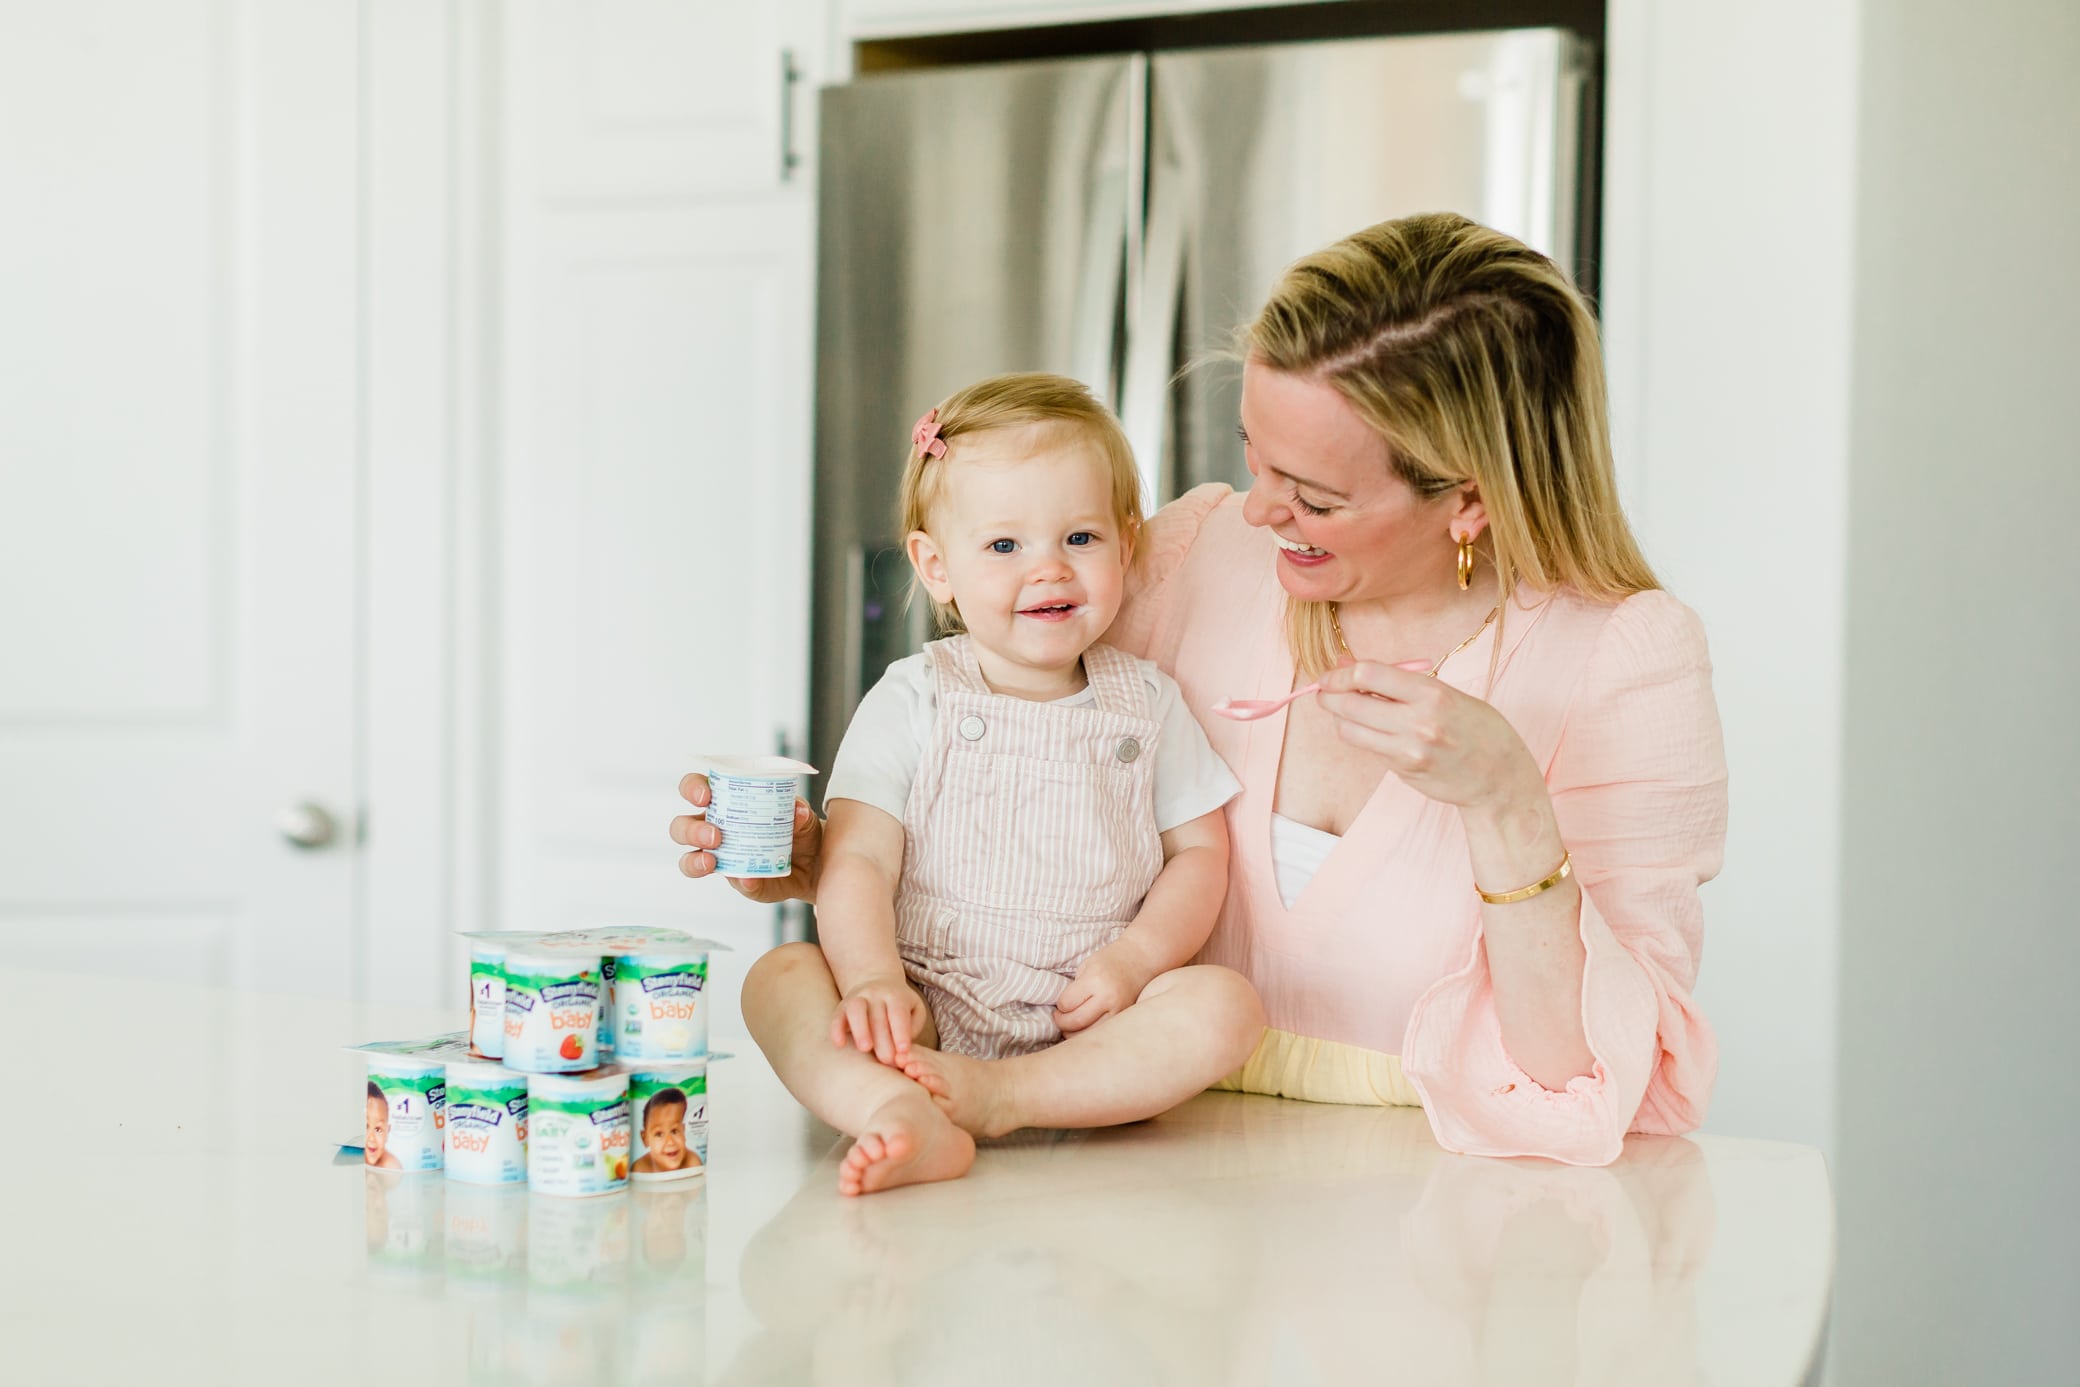 Mom in the kitchen with her baby girl giving her Stonyfield yogurt.